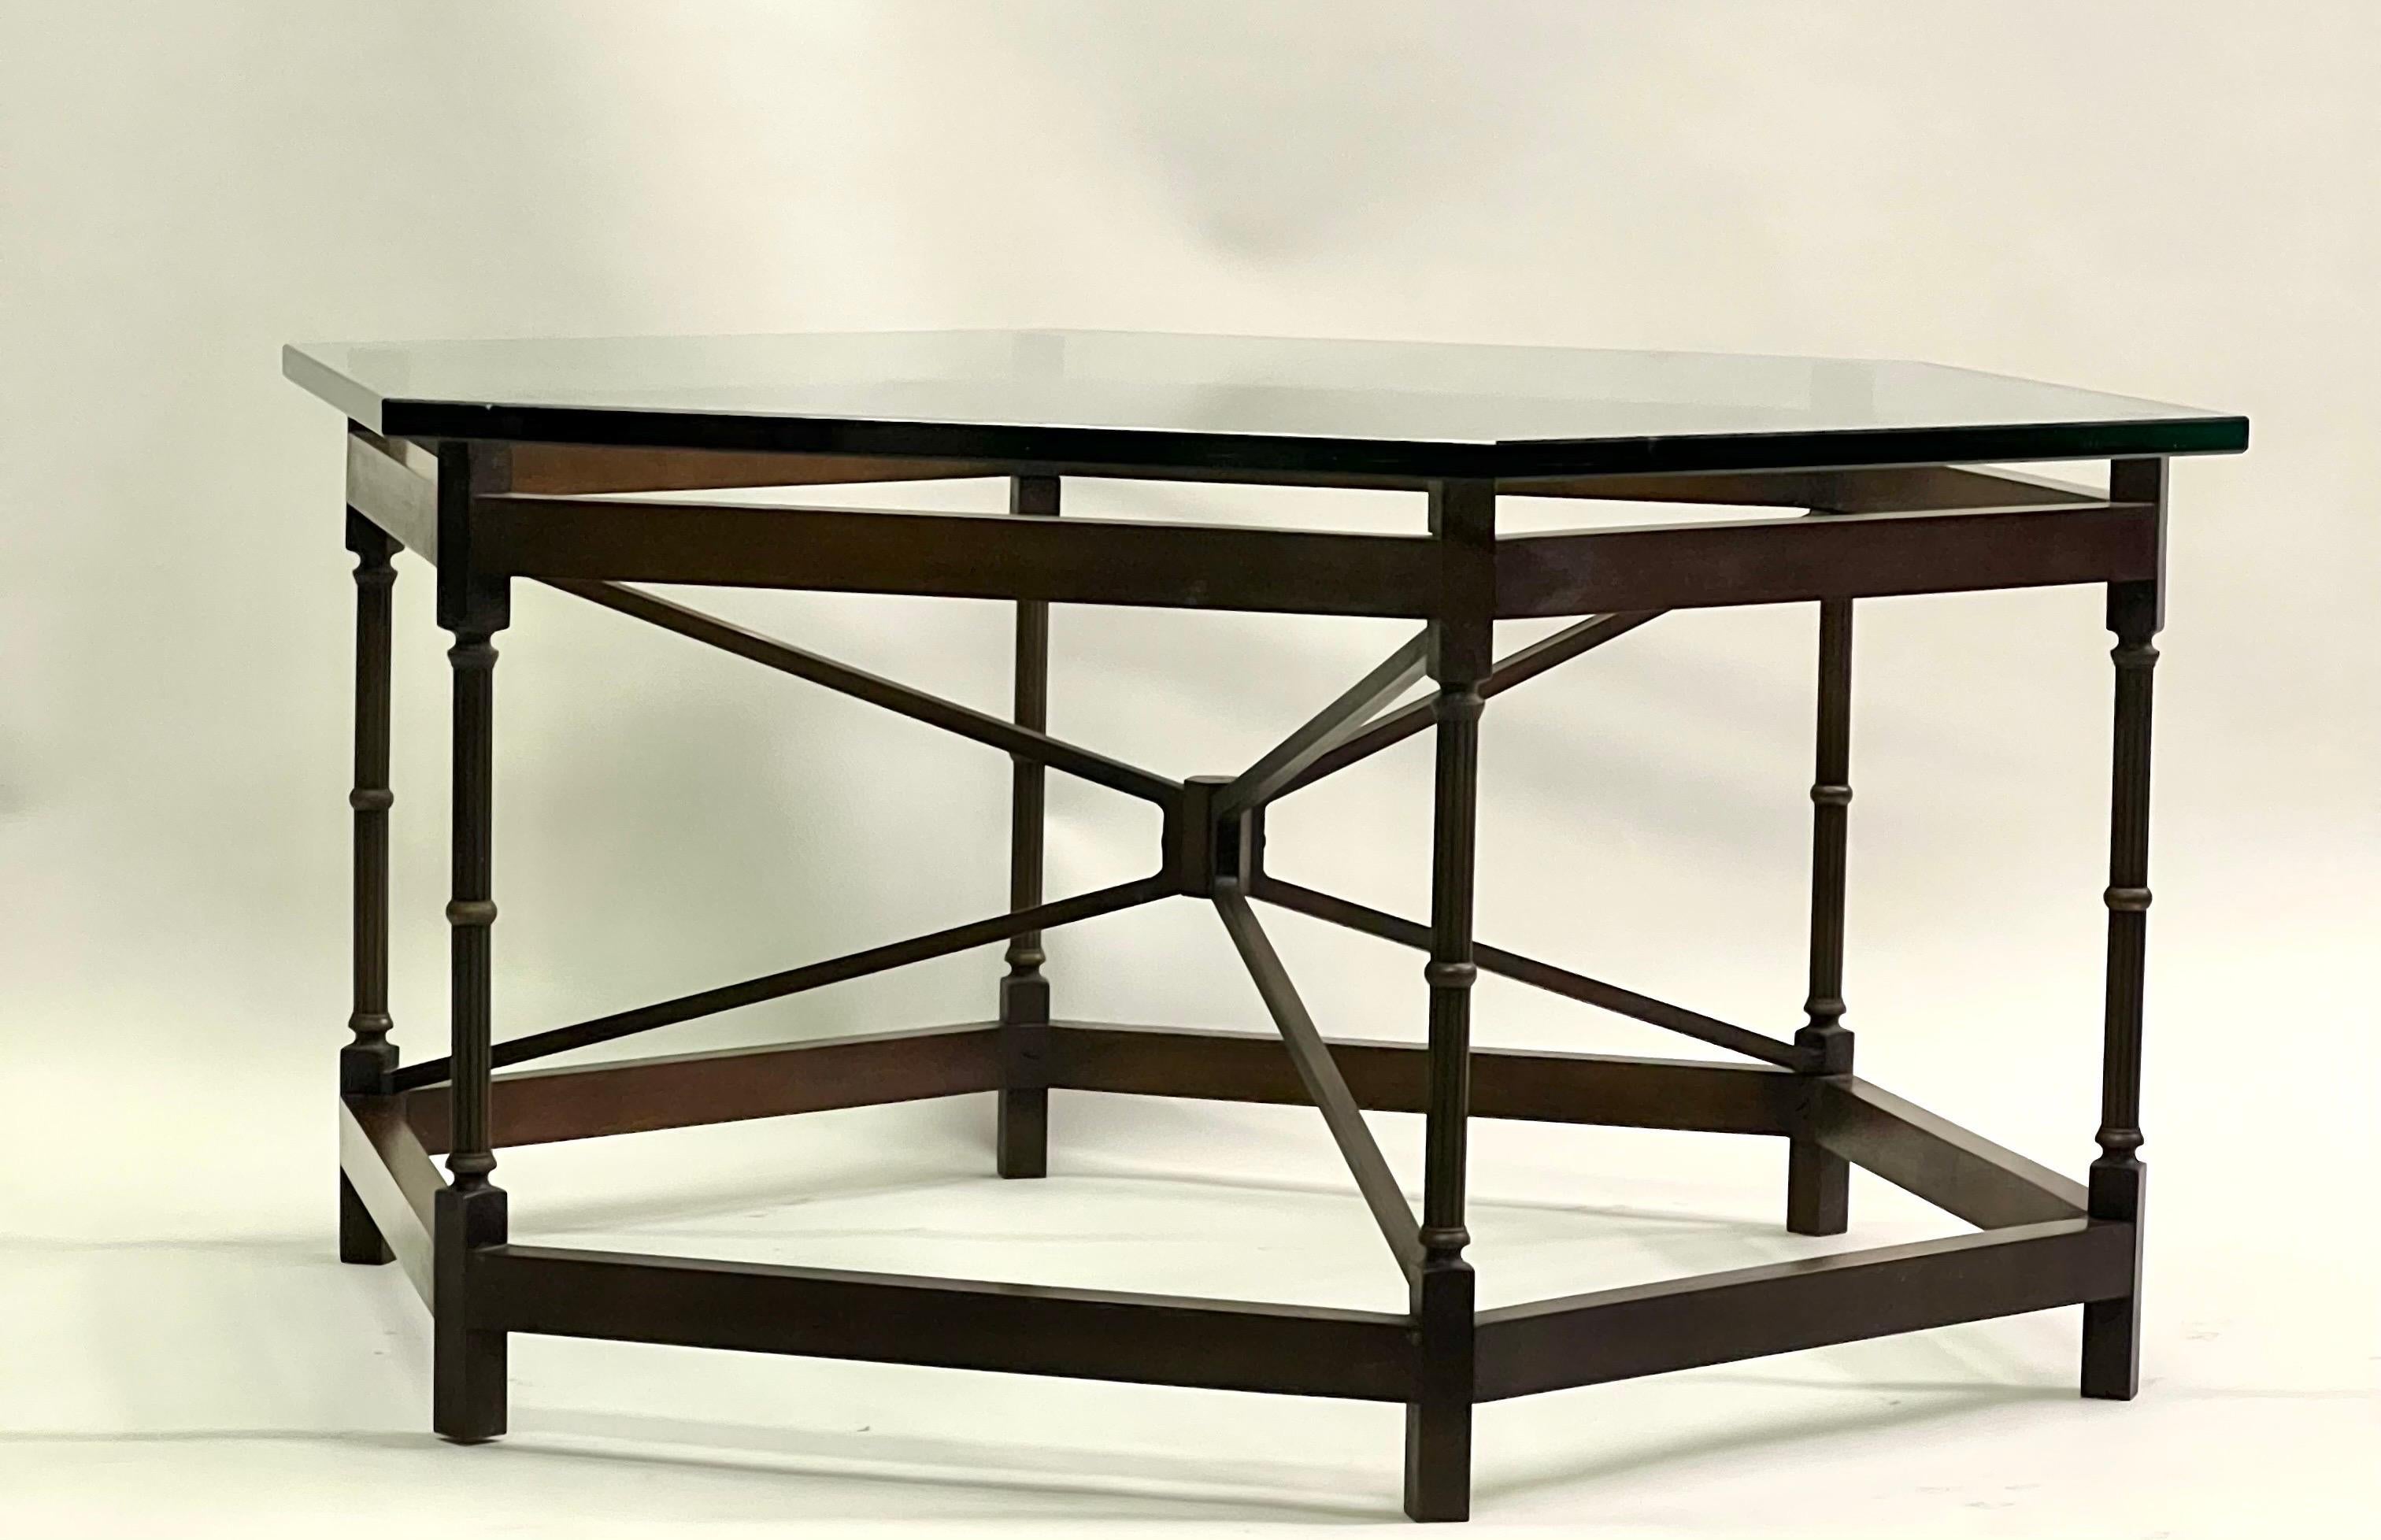 An Elegant French Mid-Century Modern Neoclassical Coffee Table Attributed to Gilbert Poillerat and possibly for a design by Andre Arbus. The cocktail table utilizes refined materials and an exquisite sense of design. The pieces is in solid brass